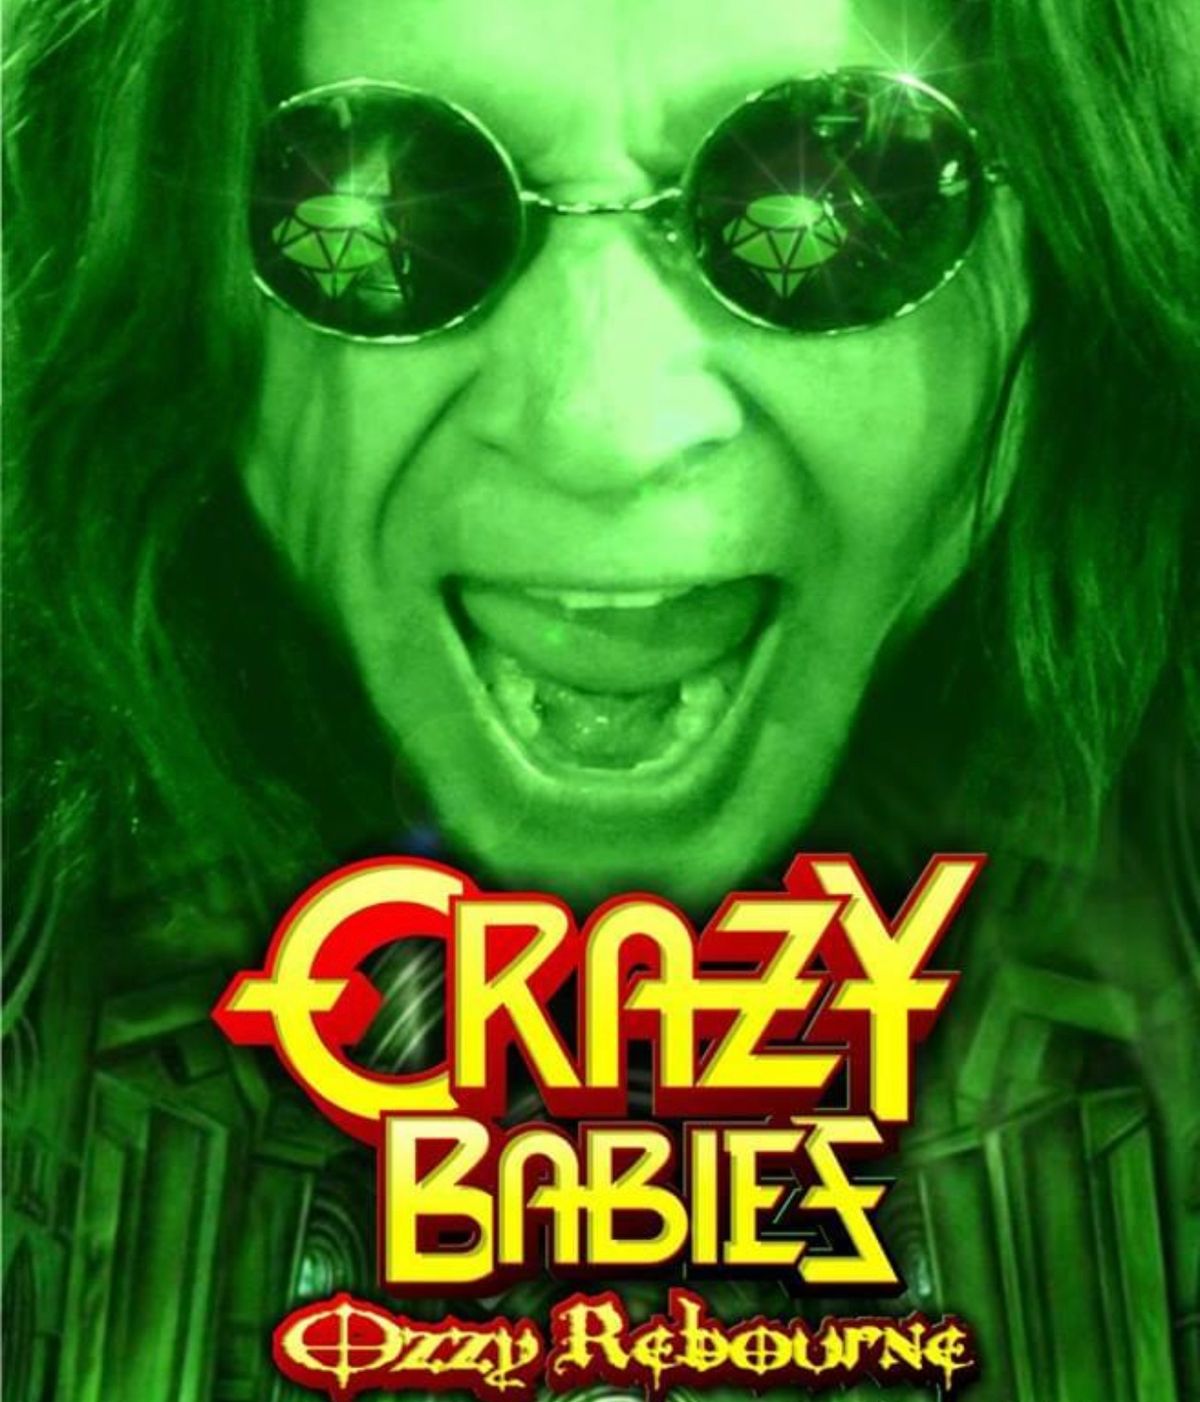 CRAZY BABIES OZZY REBOURNE AT THE BASE BAR & GRILL